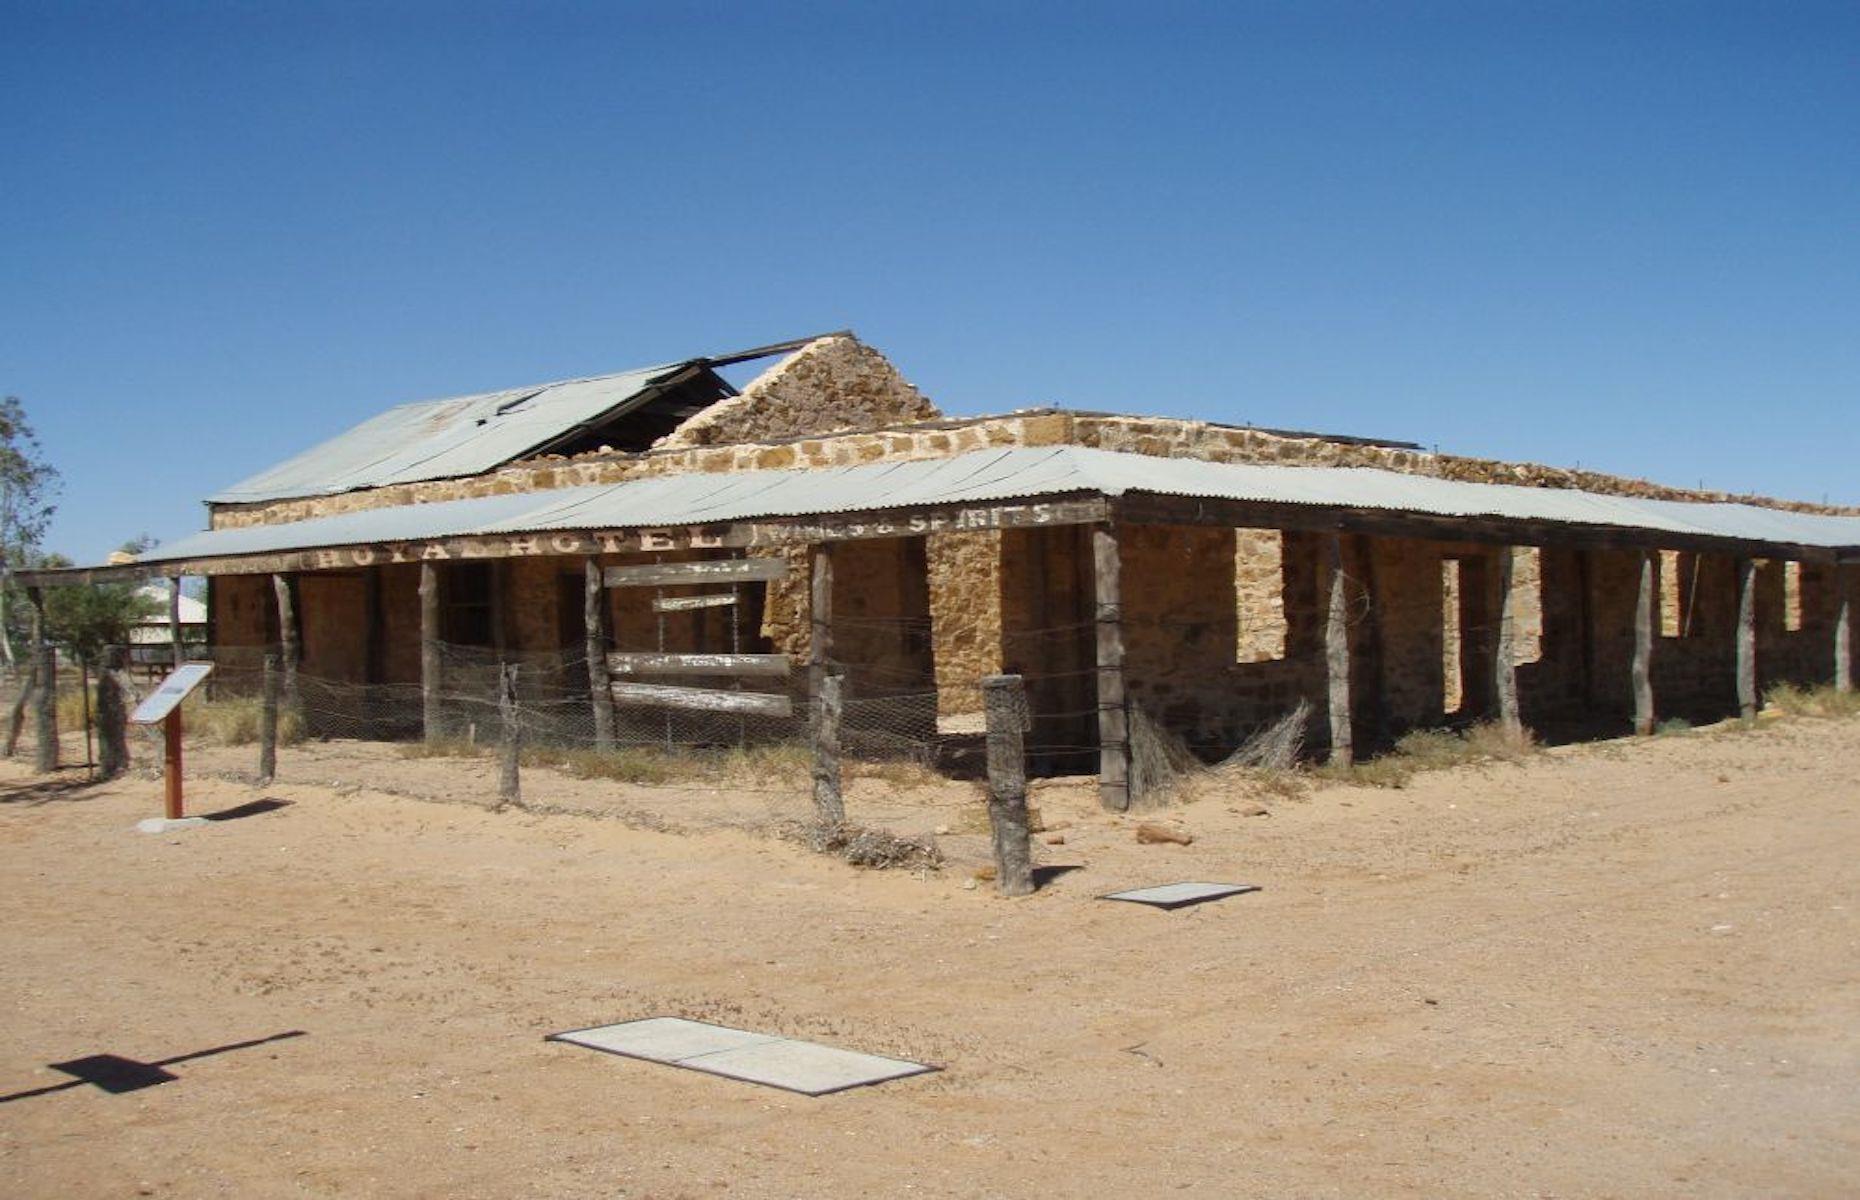 <p>Withered and weathered, the long abandoned Royal Hotel is one of a scattering of historic buildings around Birdsville. It lies on the edge of the fascinating frontier town at the end of the old drovers’ route, the Birdsville Track, on the edge of the Simpson Desert. Now National Trust-listed, the dilapidated 1880s-built building began life as a hotel but was used as a hospital by the Royal Flying Doctor Service before becoming a private home for a time. </p>